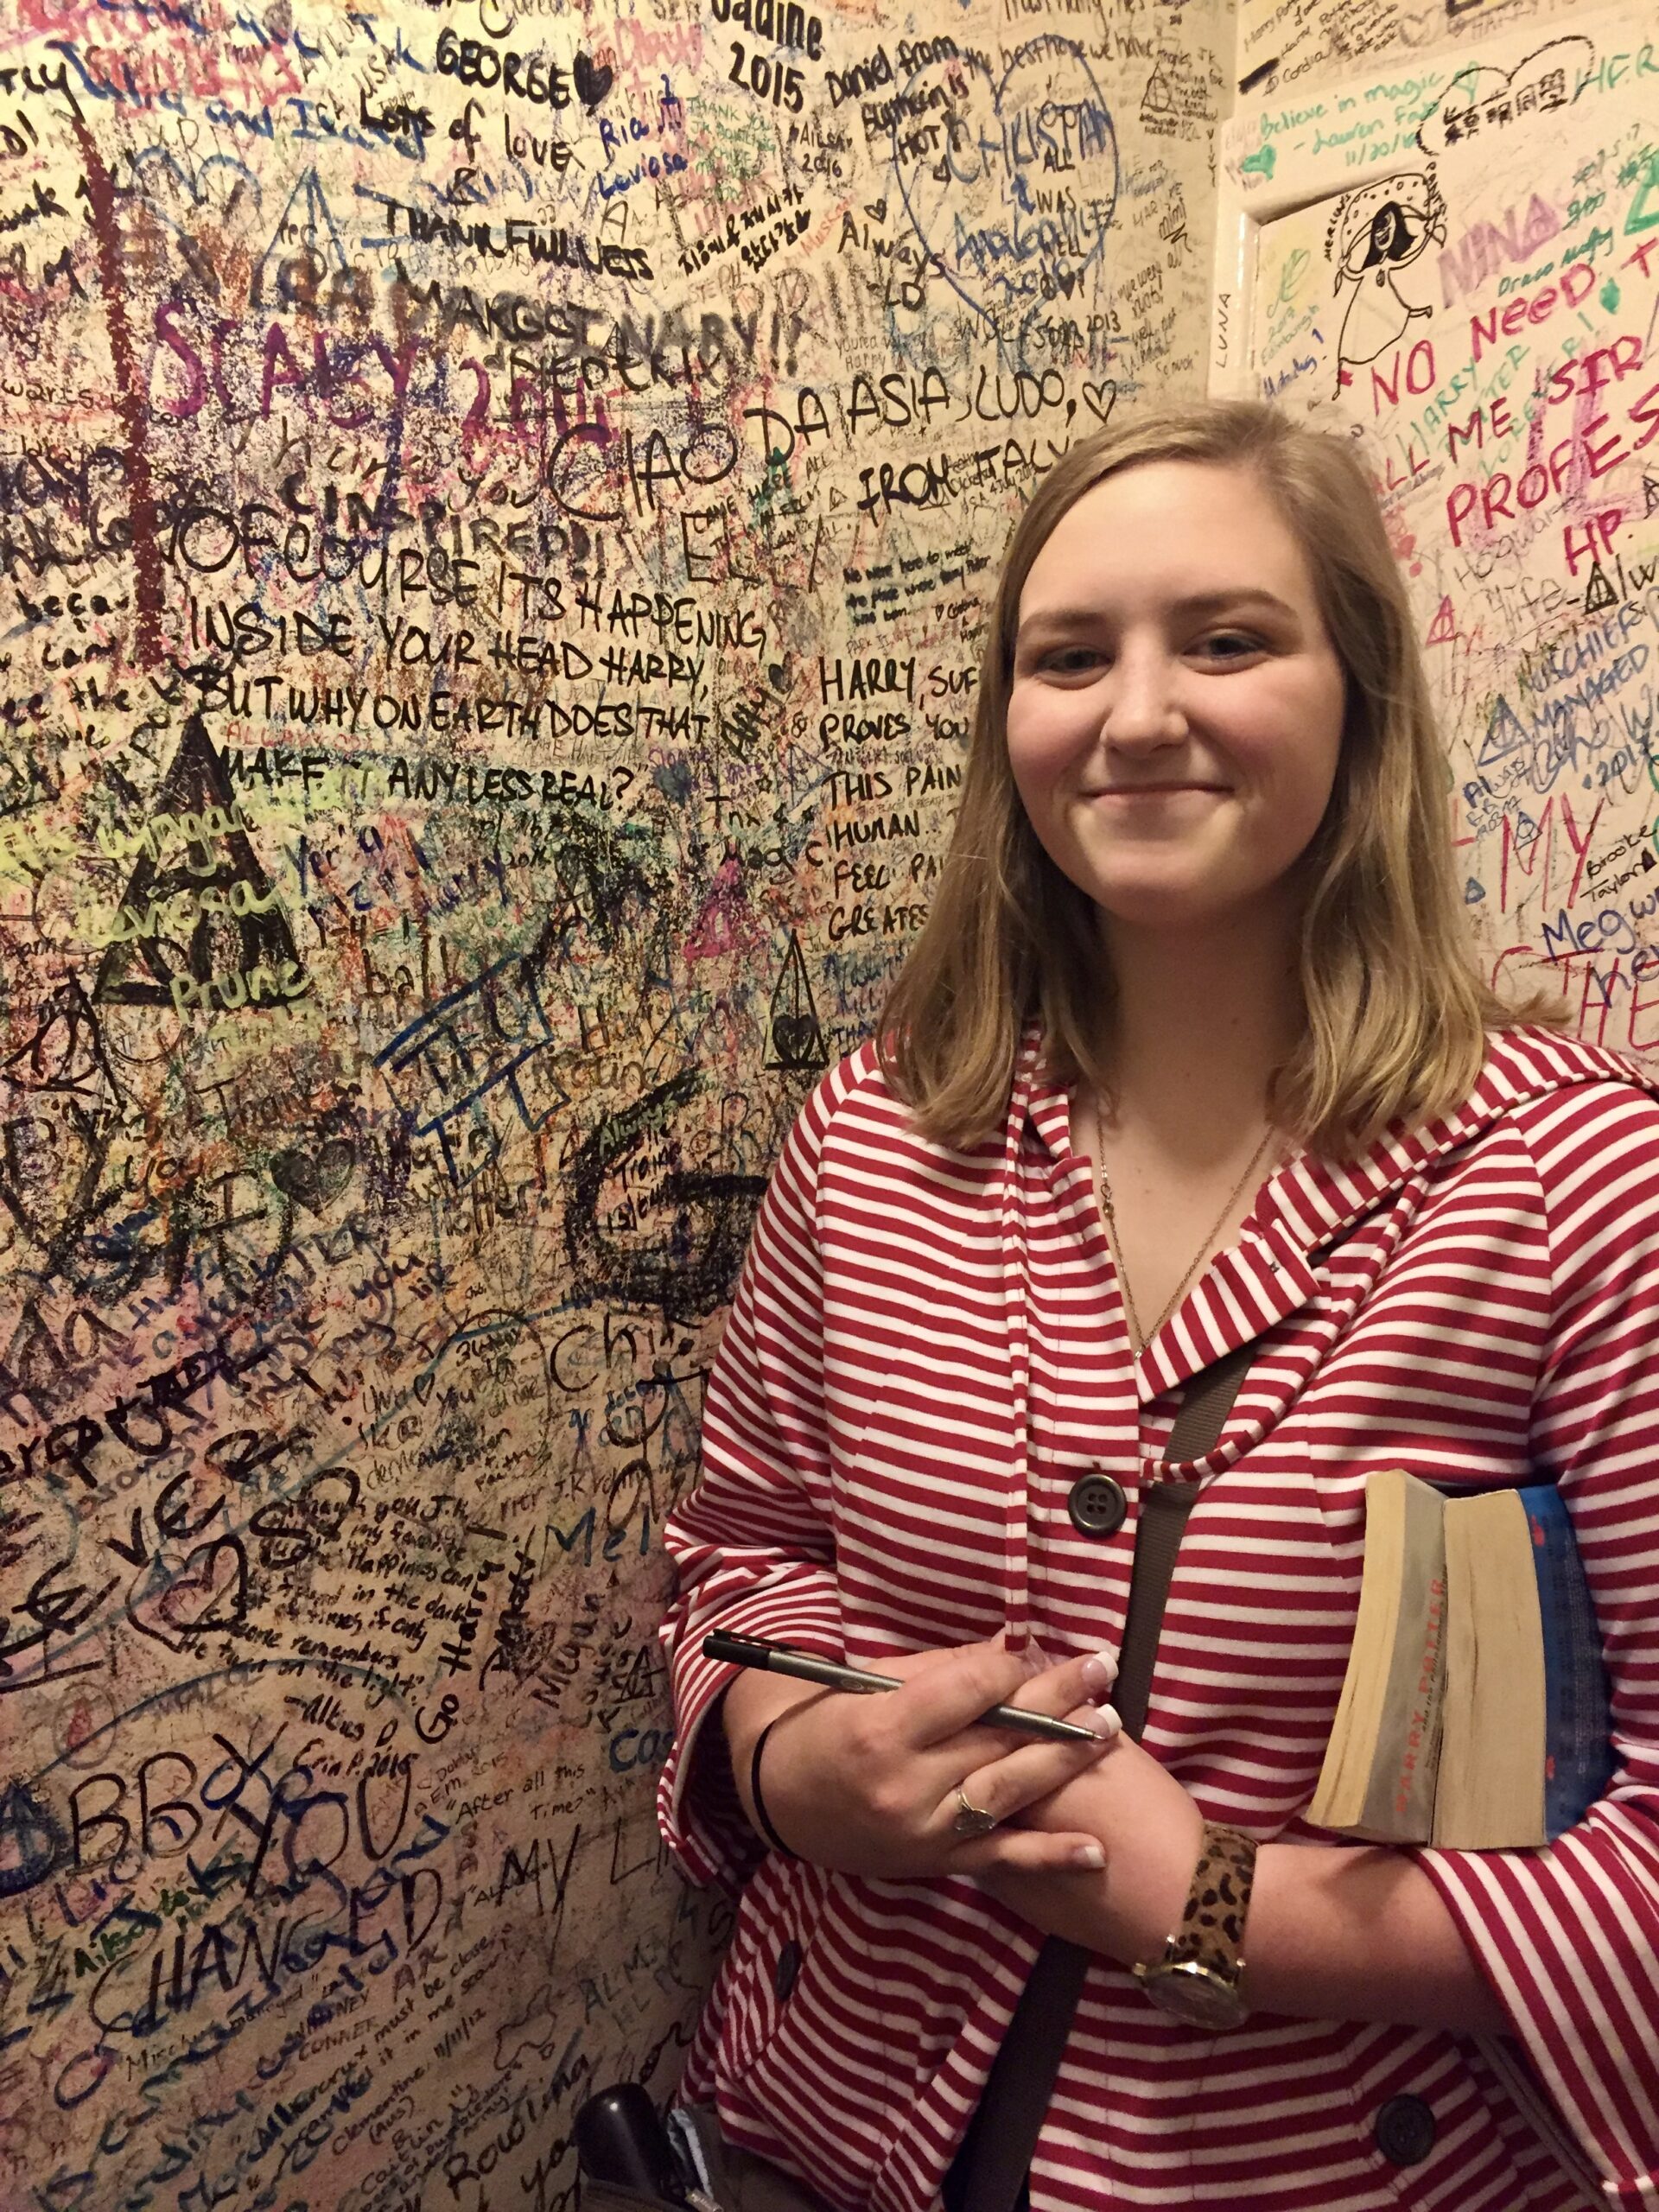 Seeing the bathroom walls in The Elephant House Cafe was jaw-dropping.